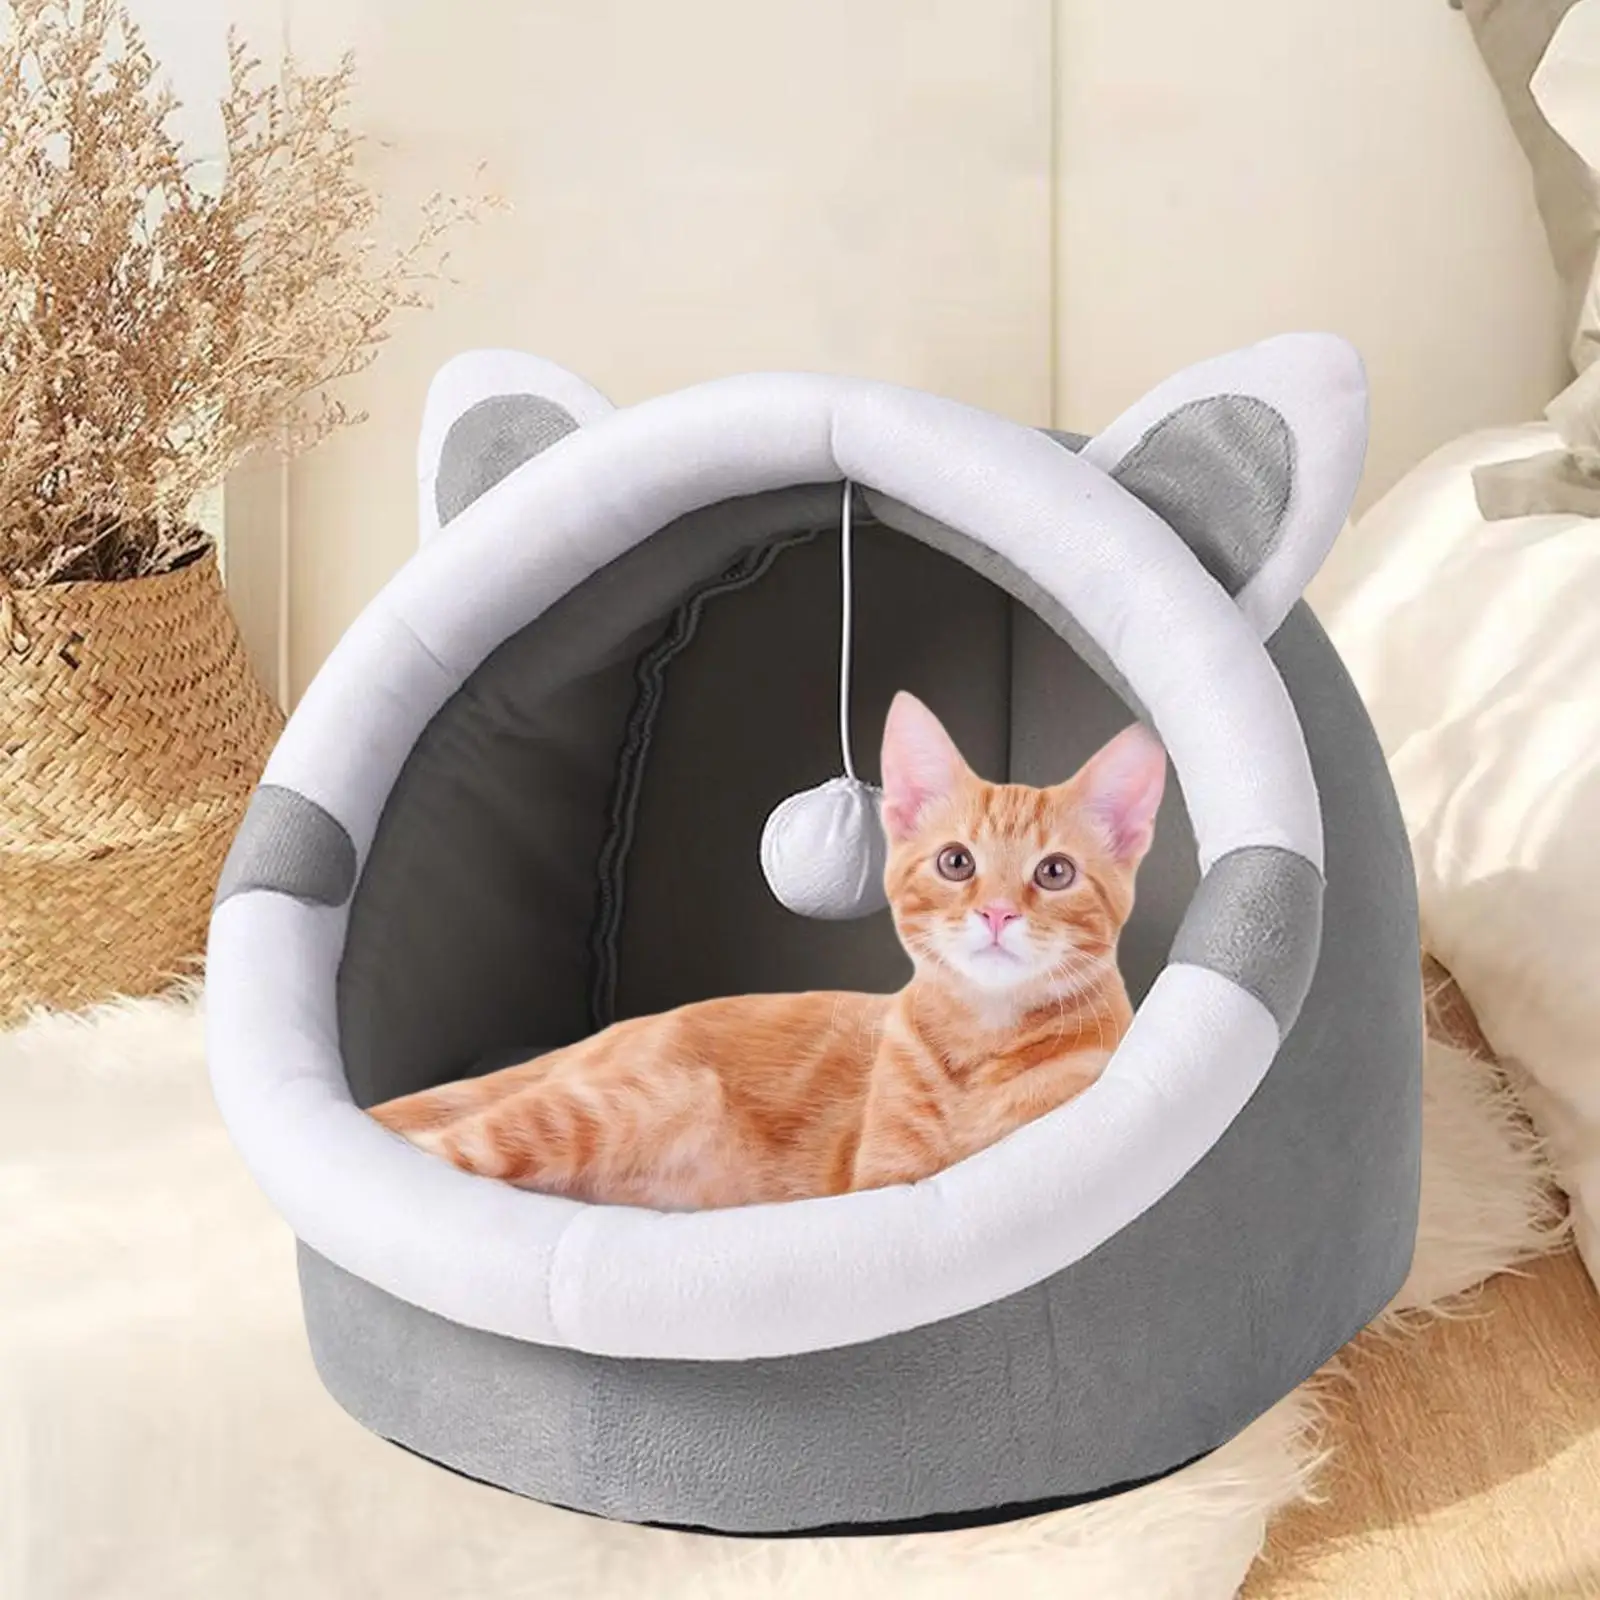 Soft Plush Cat Beds for Indoor Cats with Hanging Toy Anti Slip Bottom Comfortable Puppy Bed Pet Sofa Bed Pet Tent Pet Supplies